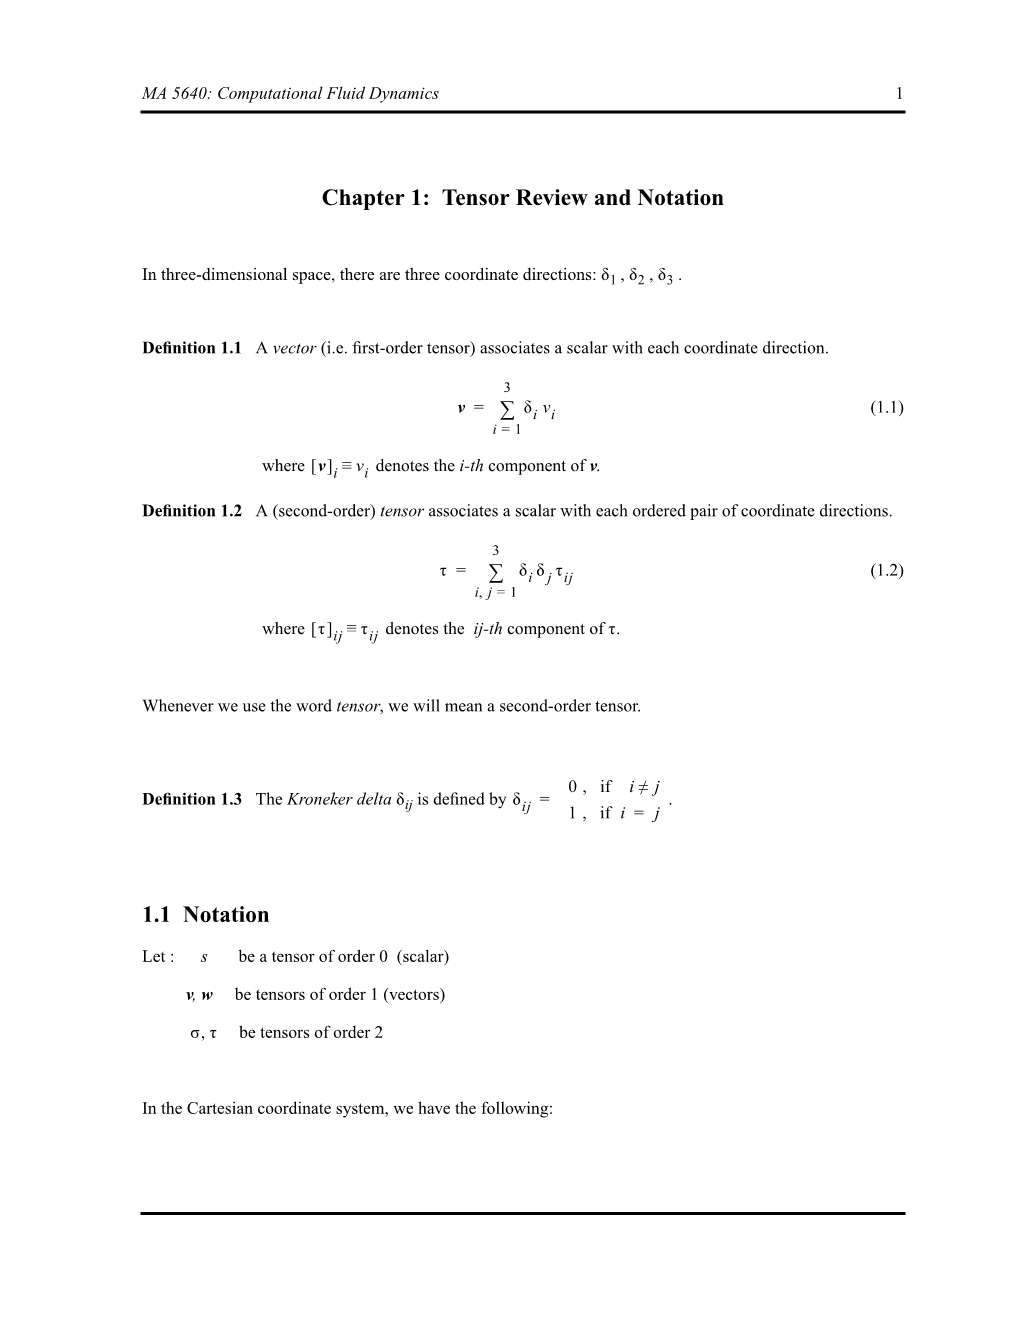 Chapter 1: Tensor Review and Notation 1.1 Notation